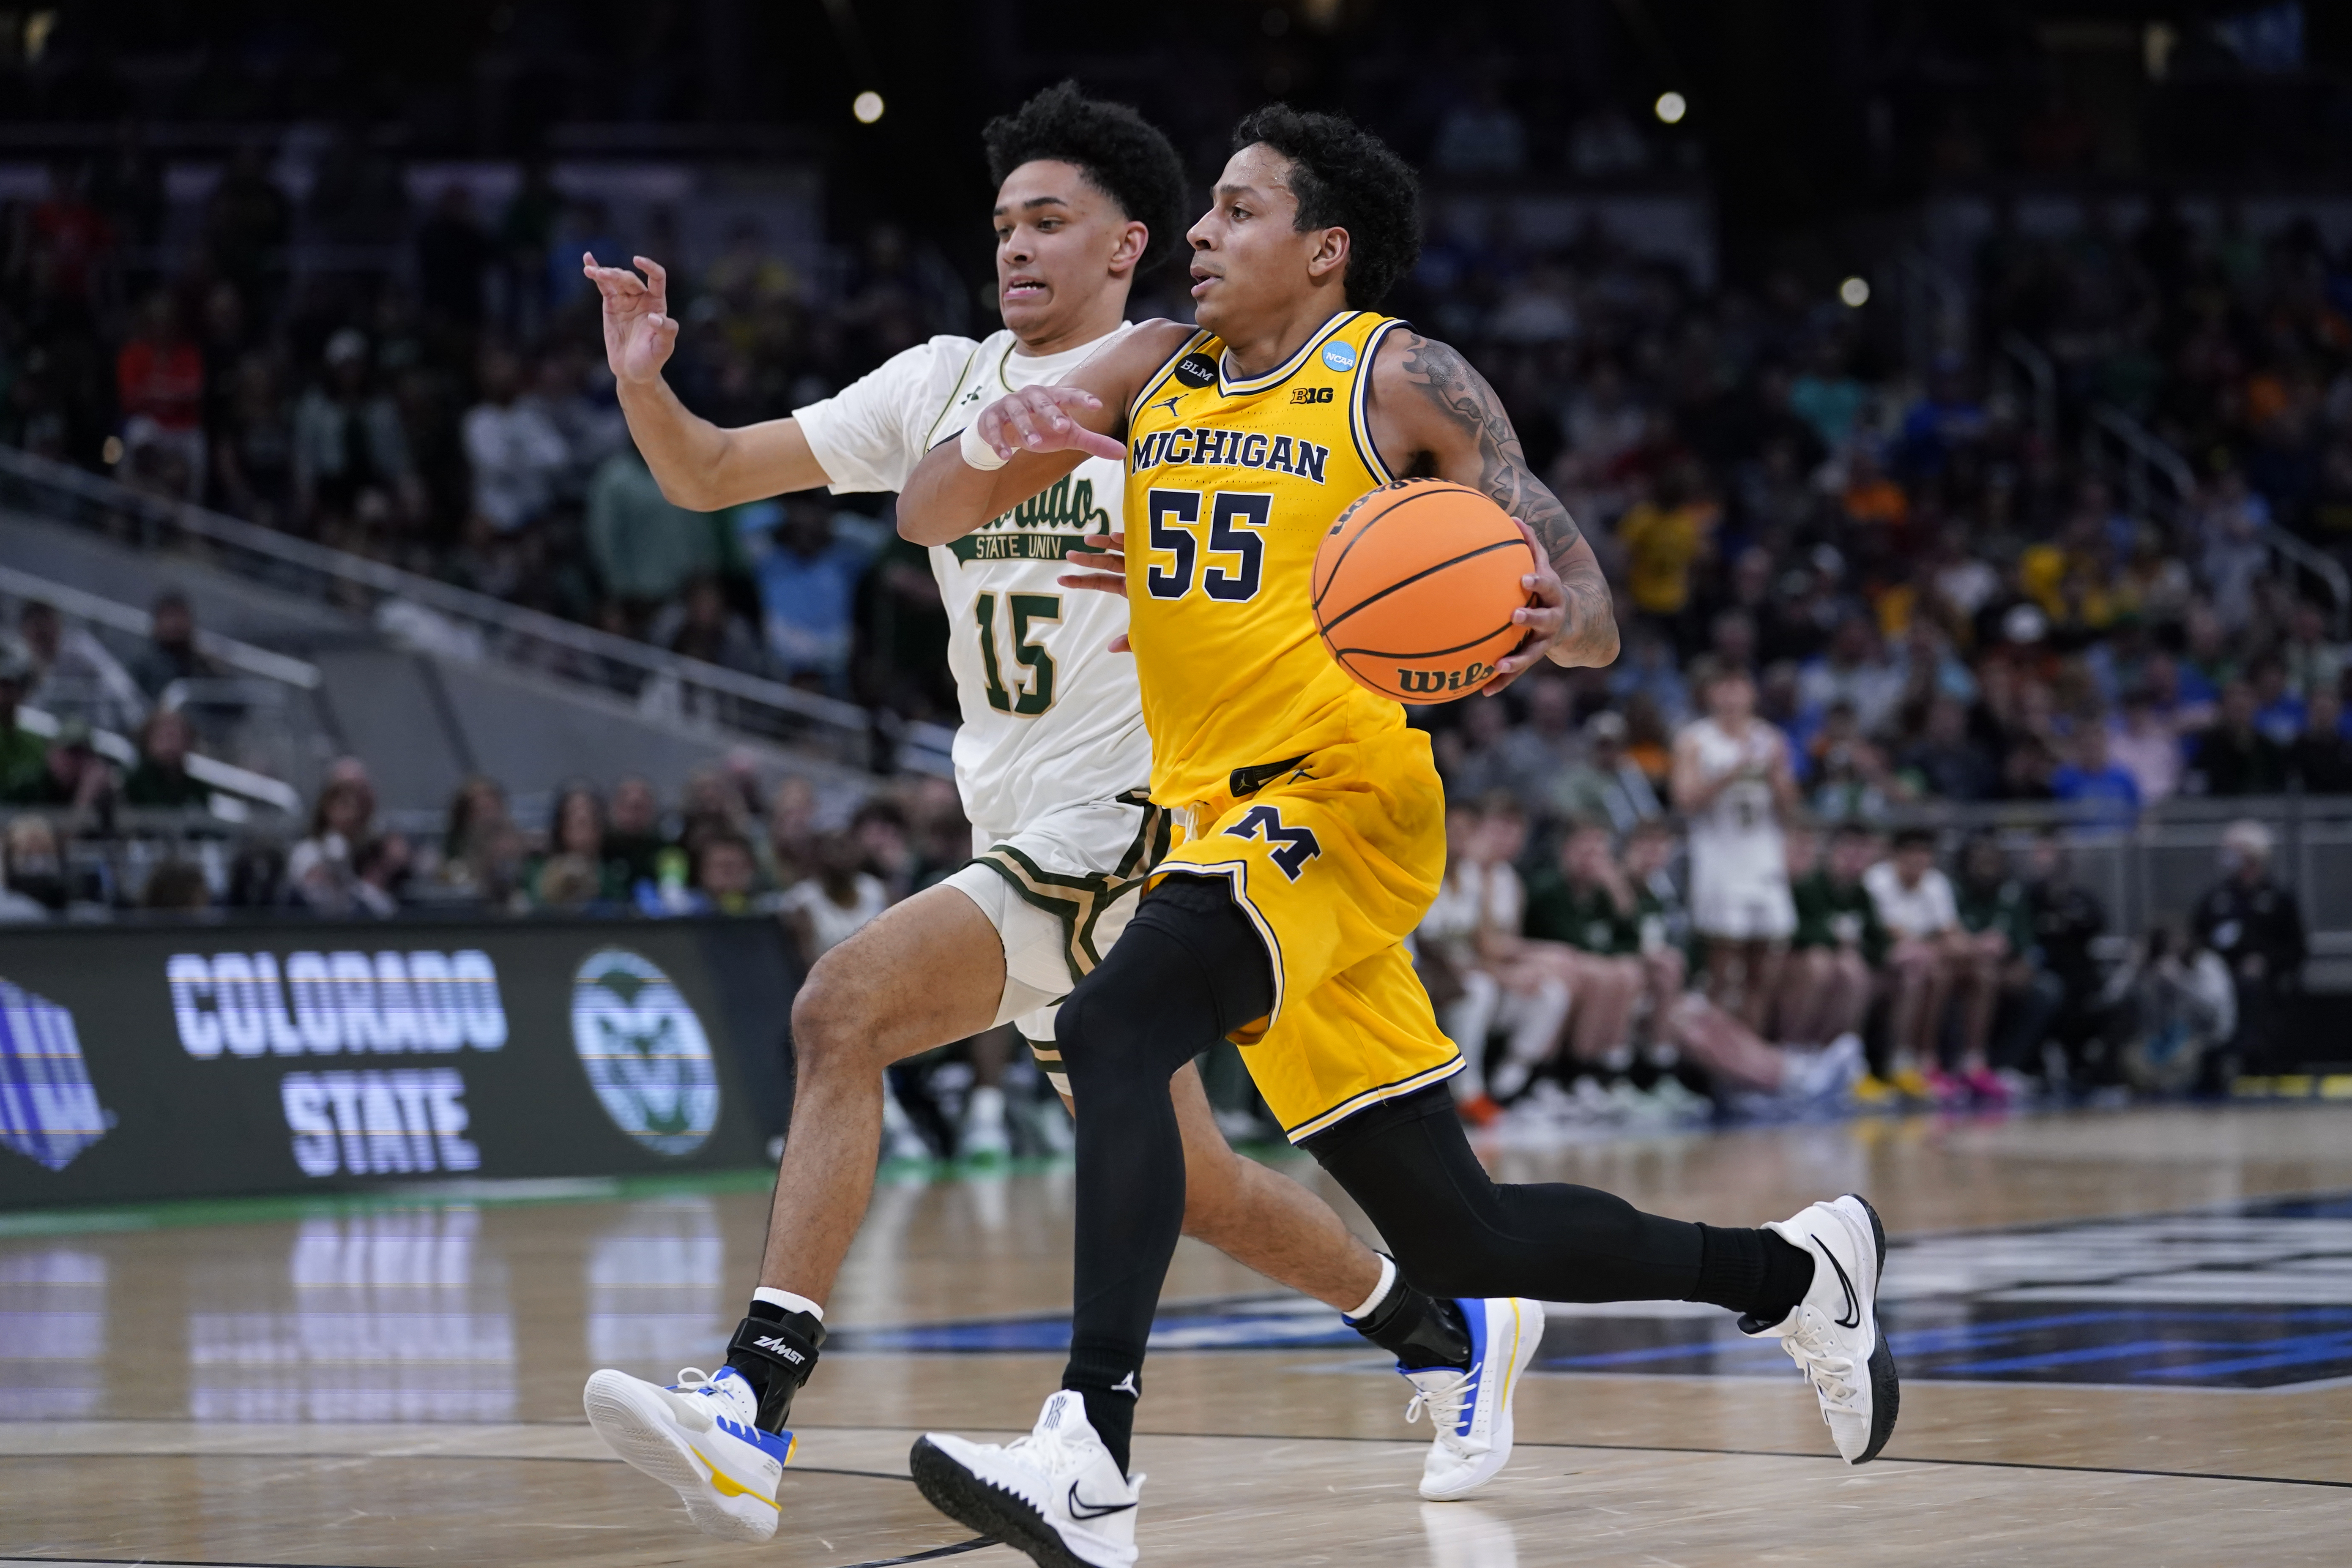 Michigan Wolverines vs Tennessee Vols basketball FREE LIVE STREAM, score, odds, TV channel, how to watch online (3/19/22)